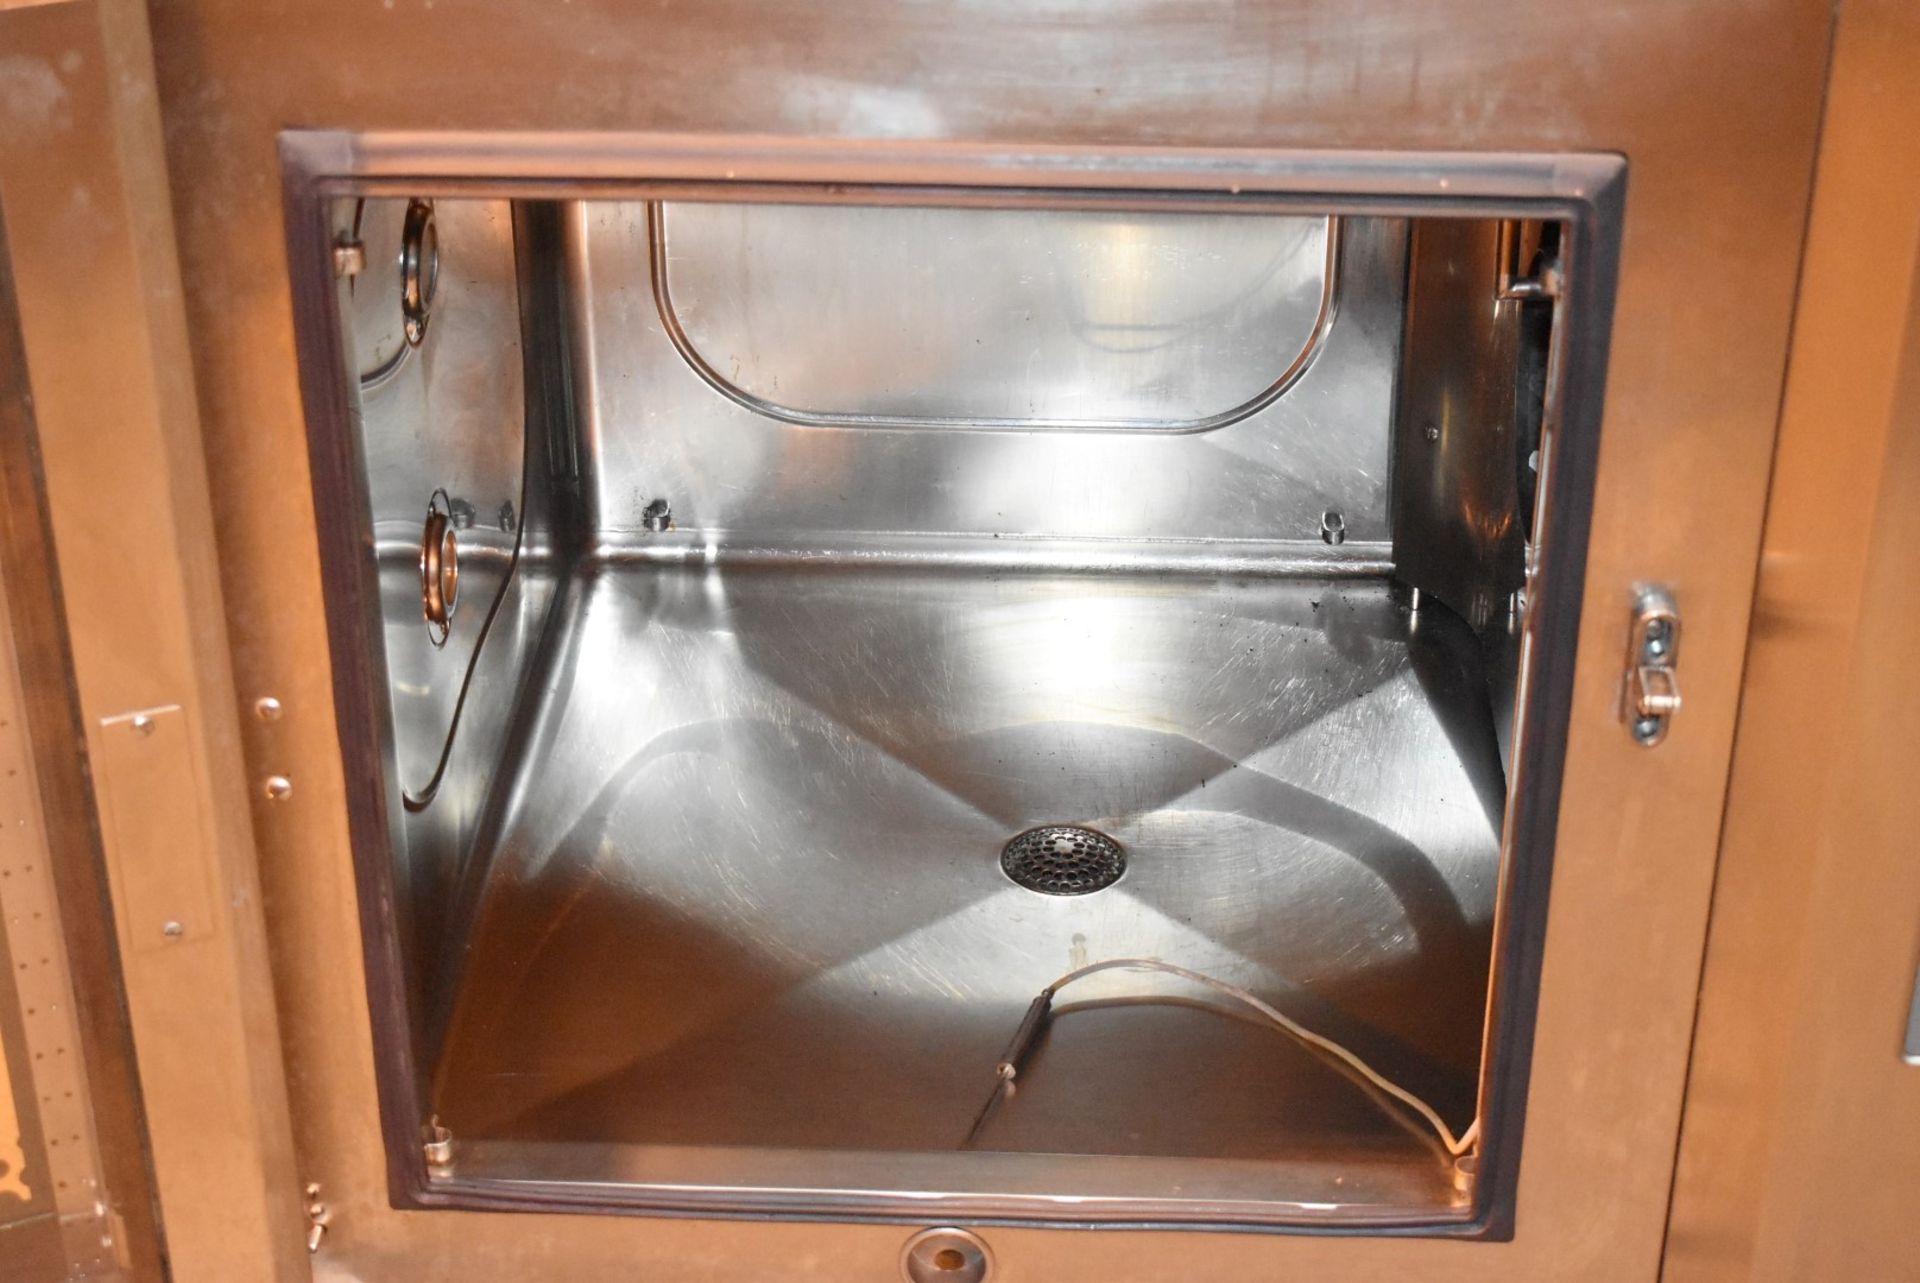 1 x Leventi Combimat mk3.1 Mastermind 6 Grid Combi Steam Oven - 3 Phase - Recently Removed From a - Image 2 of 11